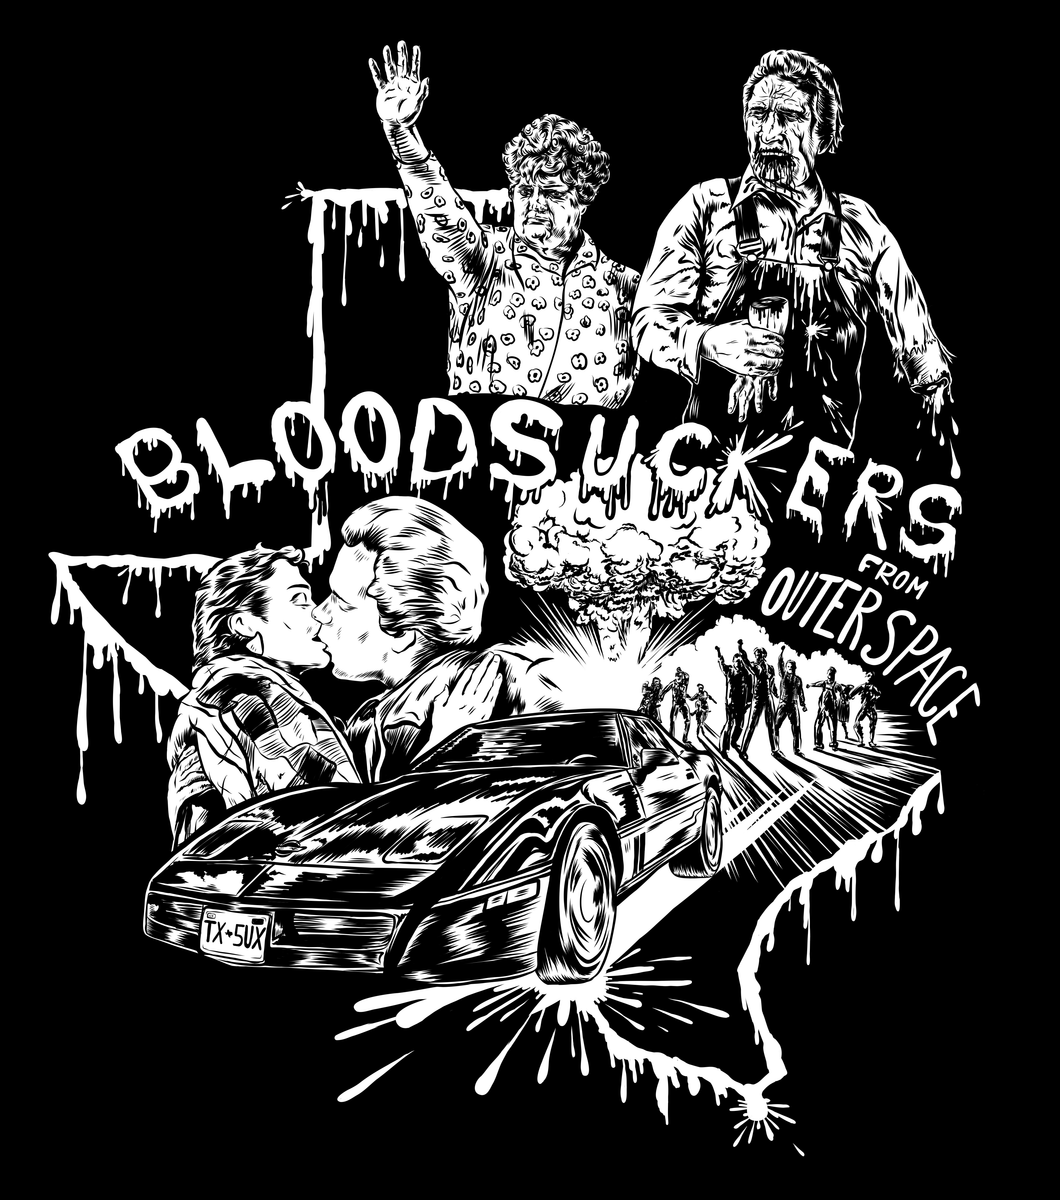 Bloodsuckers from Outer Space